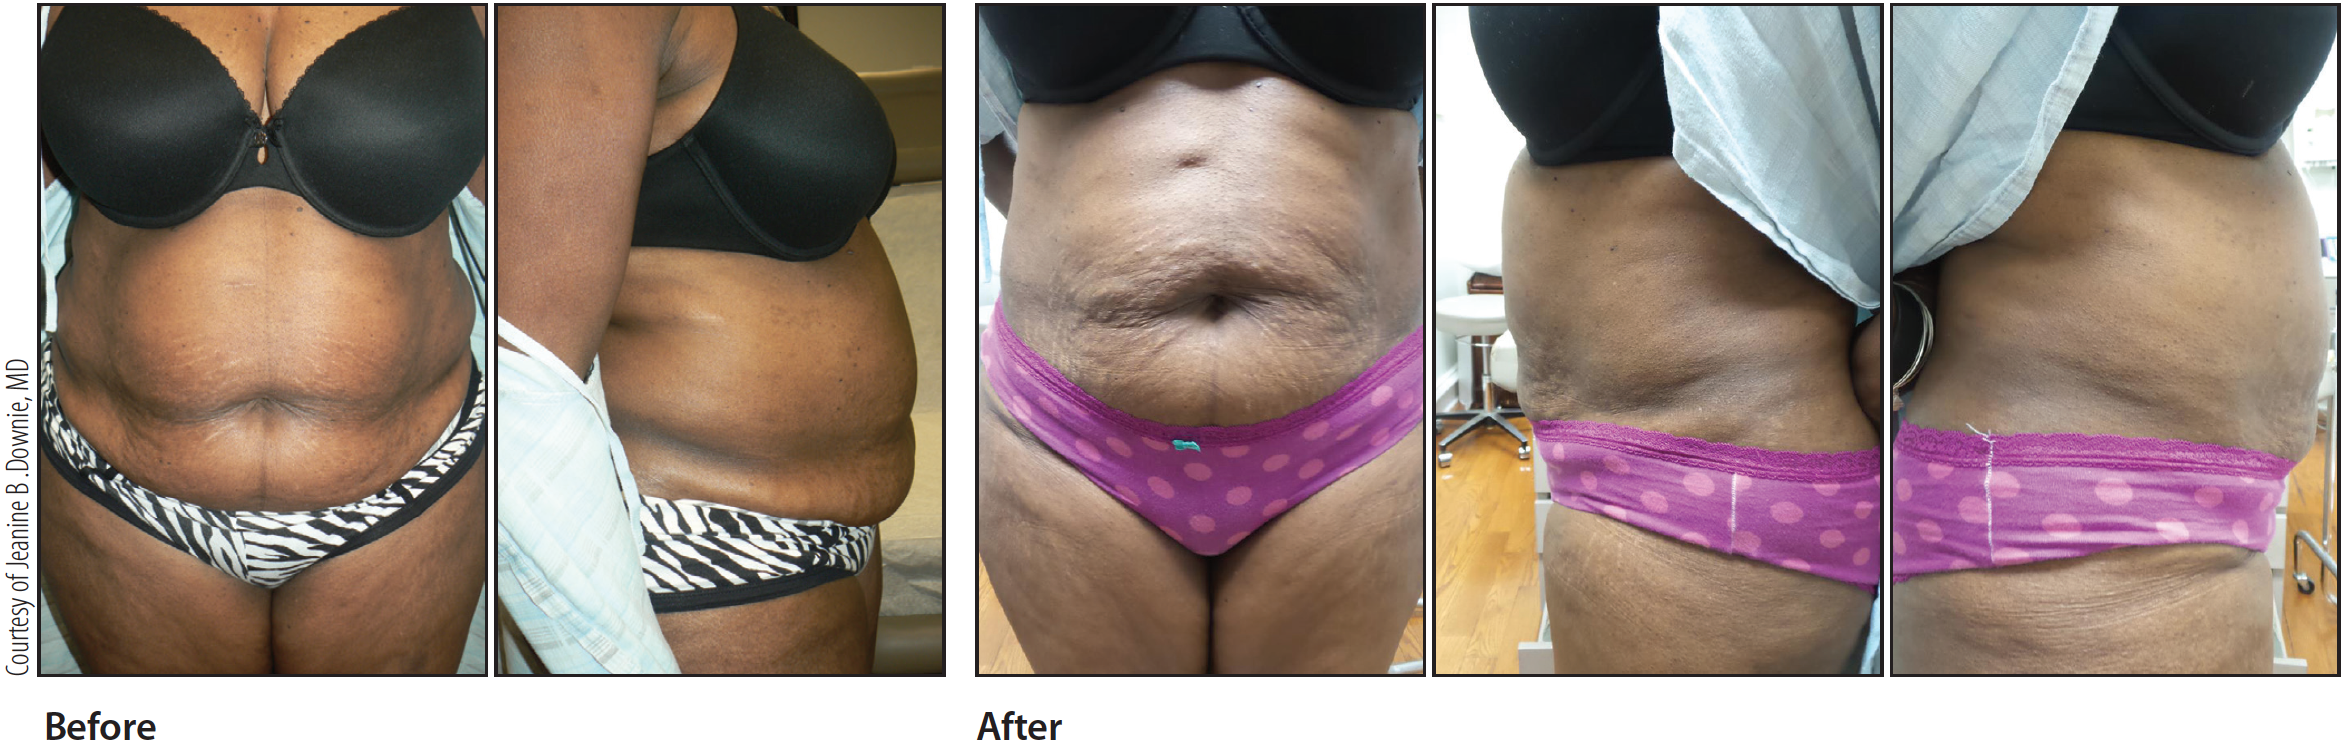 Fat Cells After Noninvasive Body Contouring Treatment